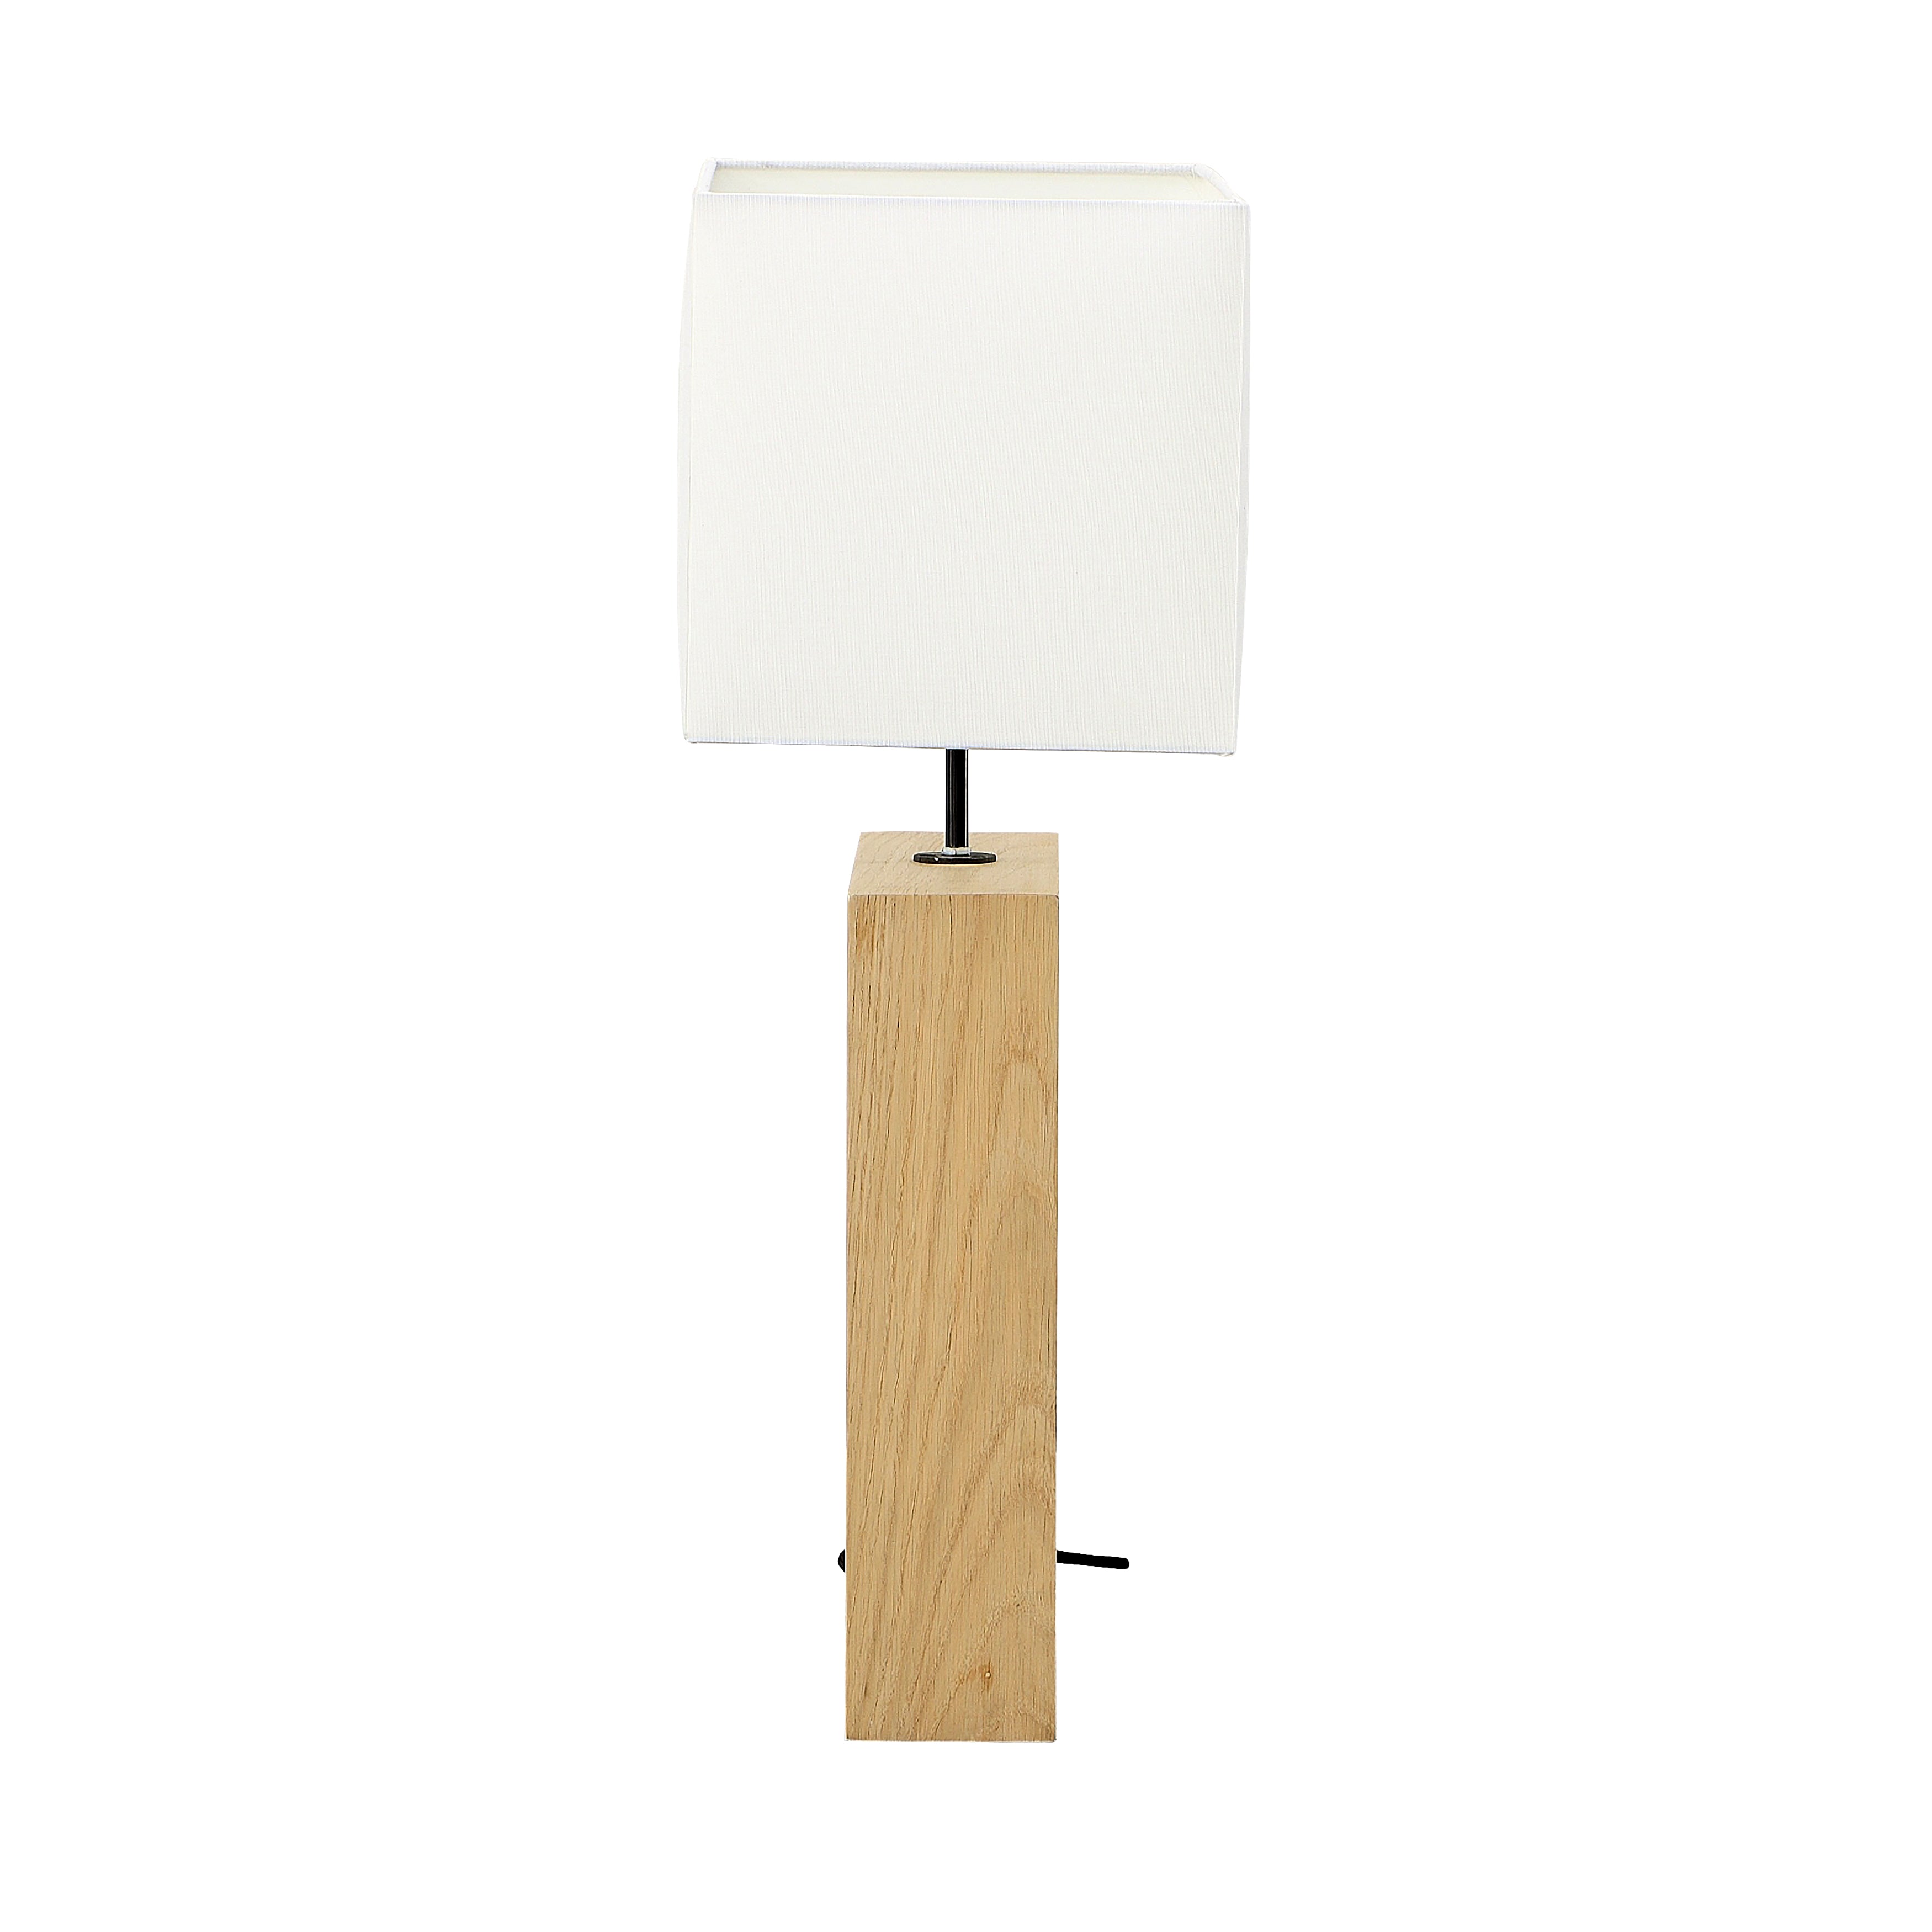 Create a calming ambiance with this modern art-inspired table lamp, displaying an ultimate combination of style and warmth for your interior space. Amethyst Home provides interior design, new home construction design consulting, vintage area rugs, and lighting in the San Diego metro area.